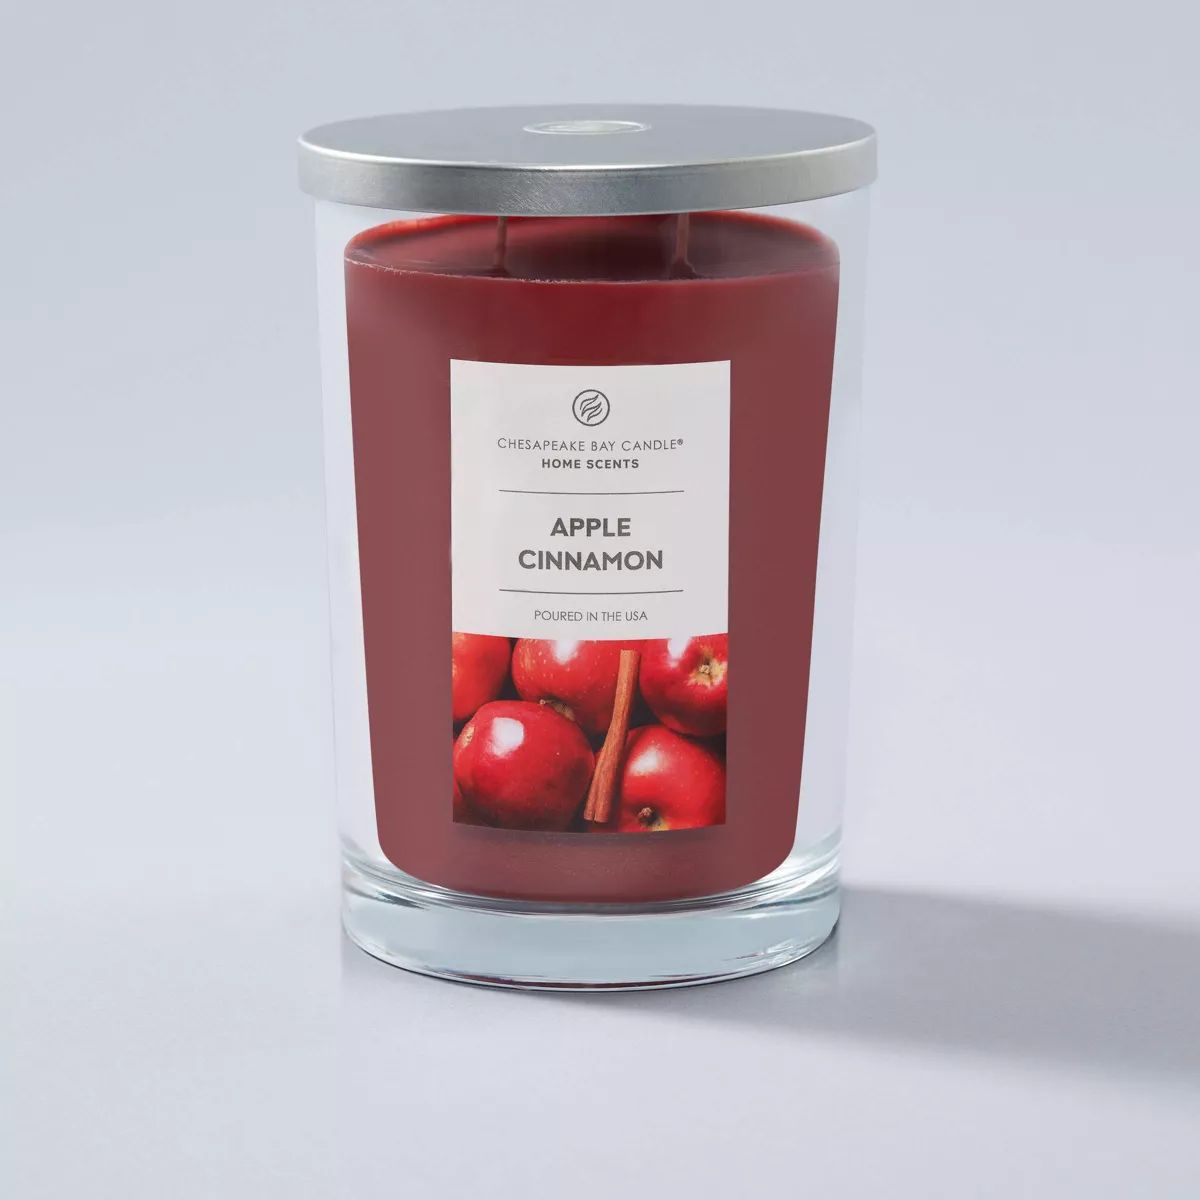 Jar Candle Apple Cinnamon - Home Scents by Chesapeake Bay Candle | Target